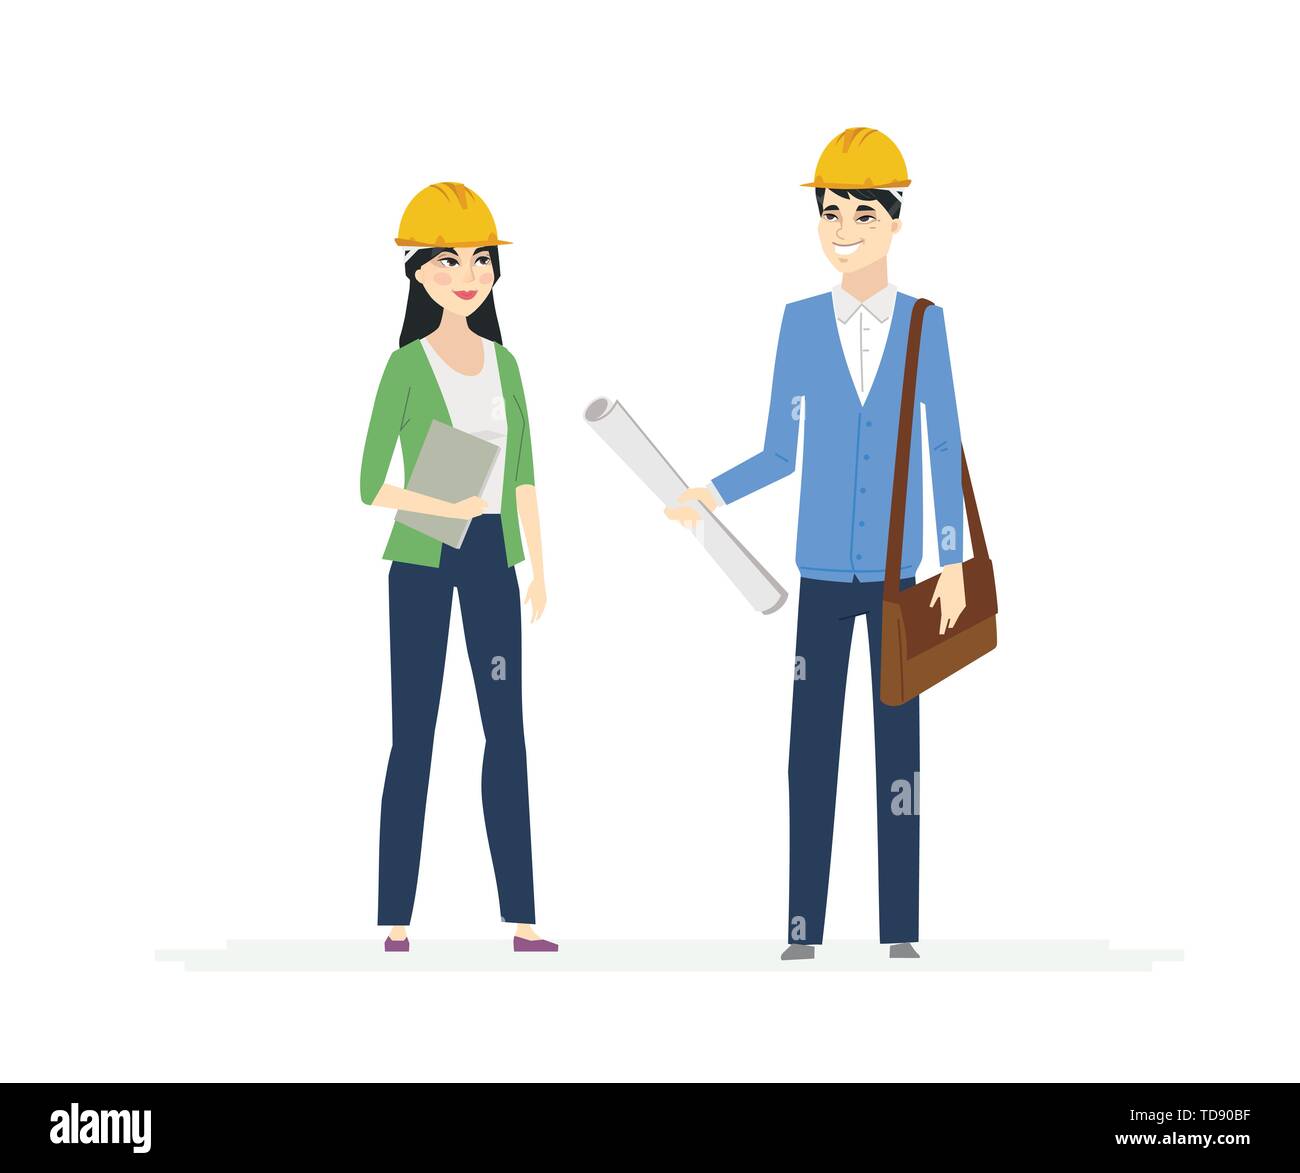 Chinese Construction Workers - cartoon people characters illustration Stock Vector